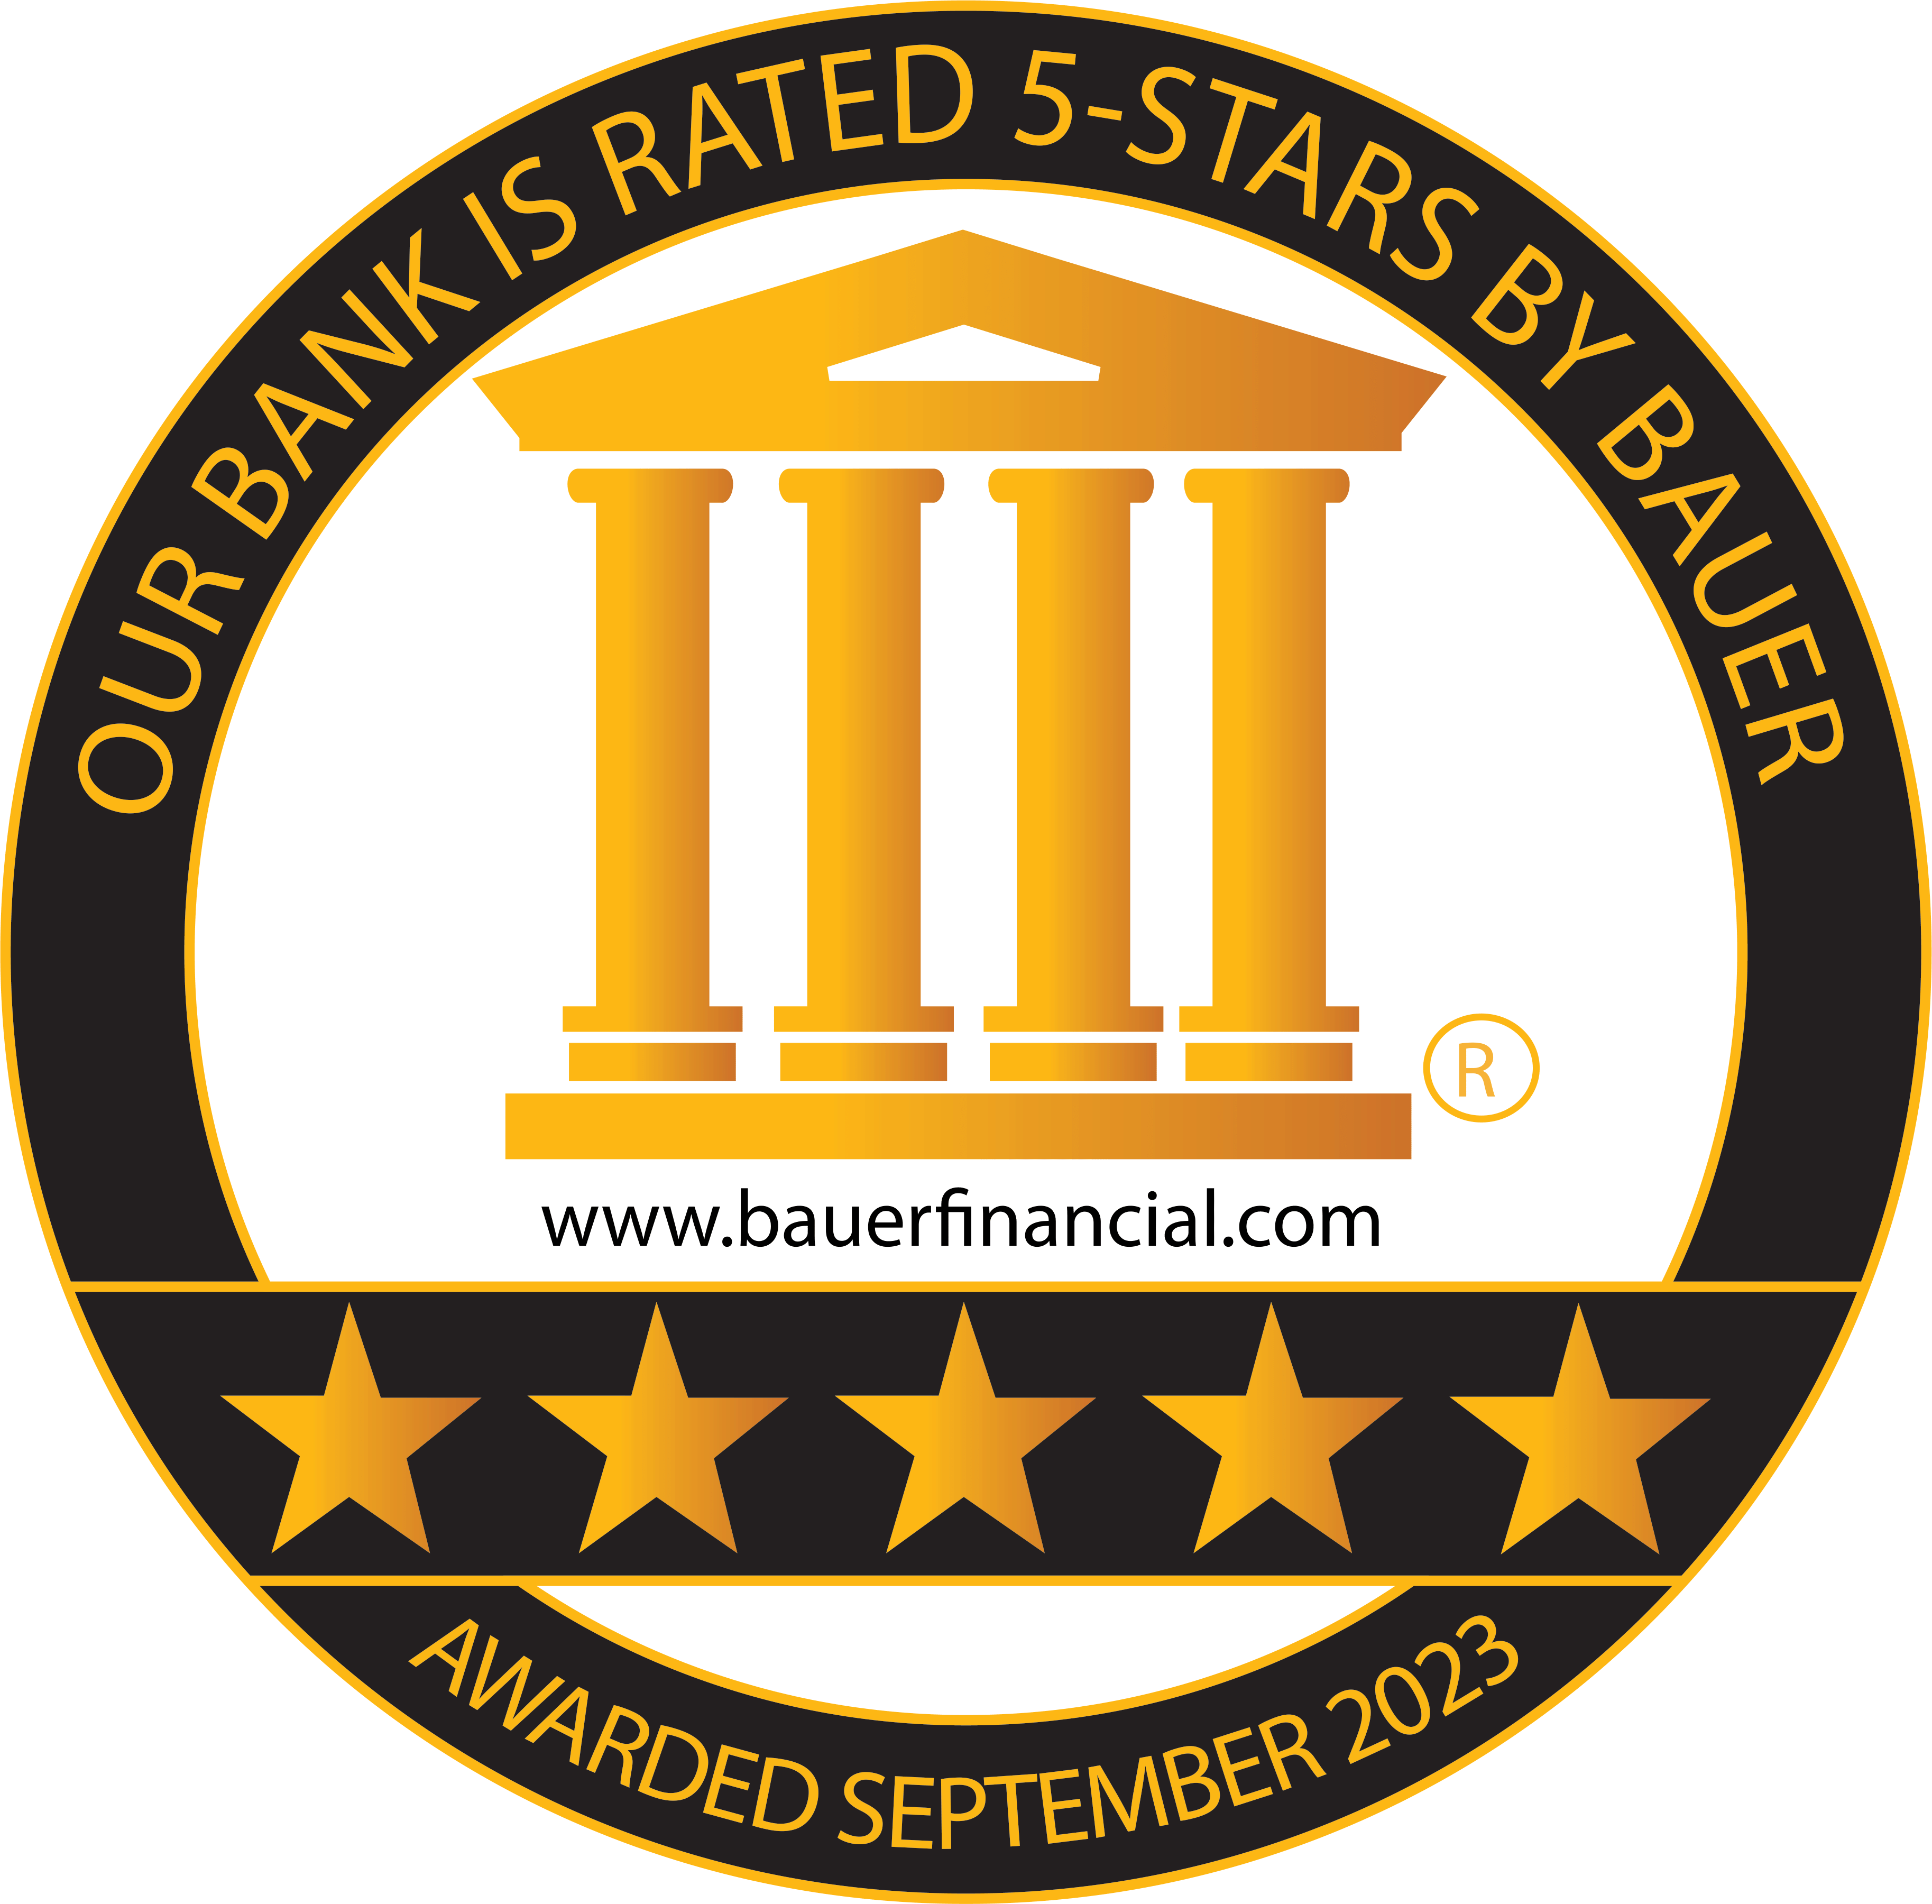 Our bank is rated 5-stars by Bauer